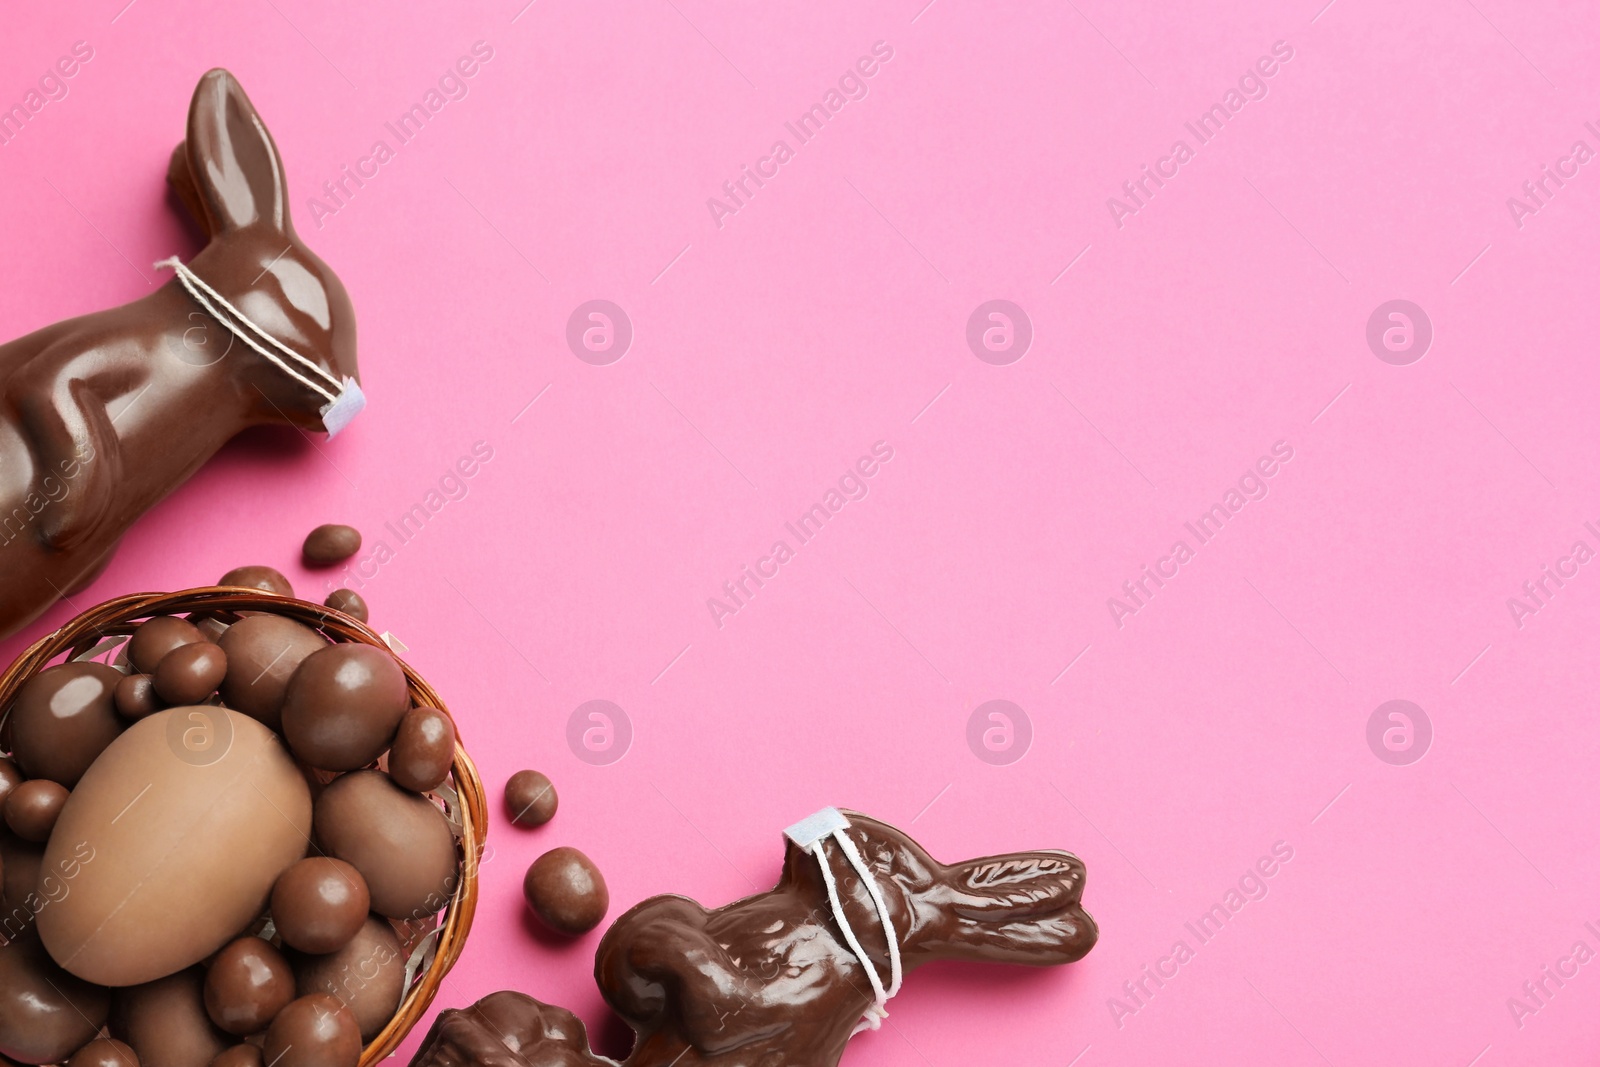 Photo of Chocolate bunnies with protective masks, candies and space for text on pink background, flat lay. Easter holiday during COVID-19 quarantine